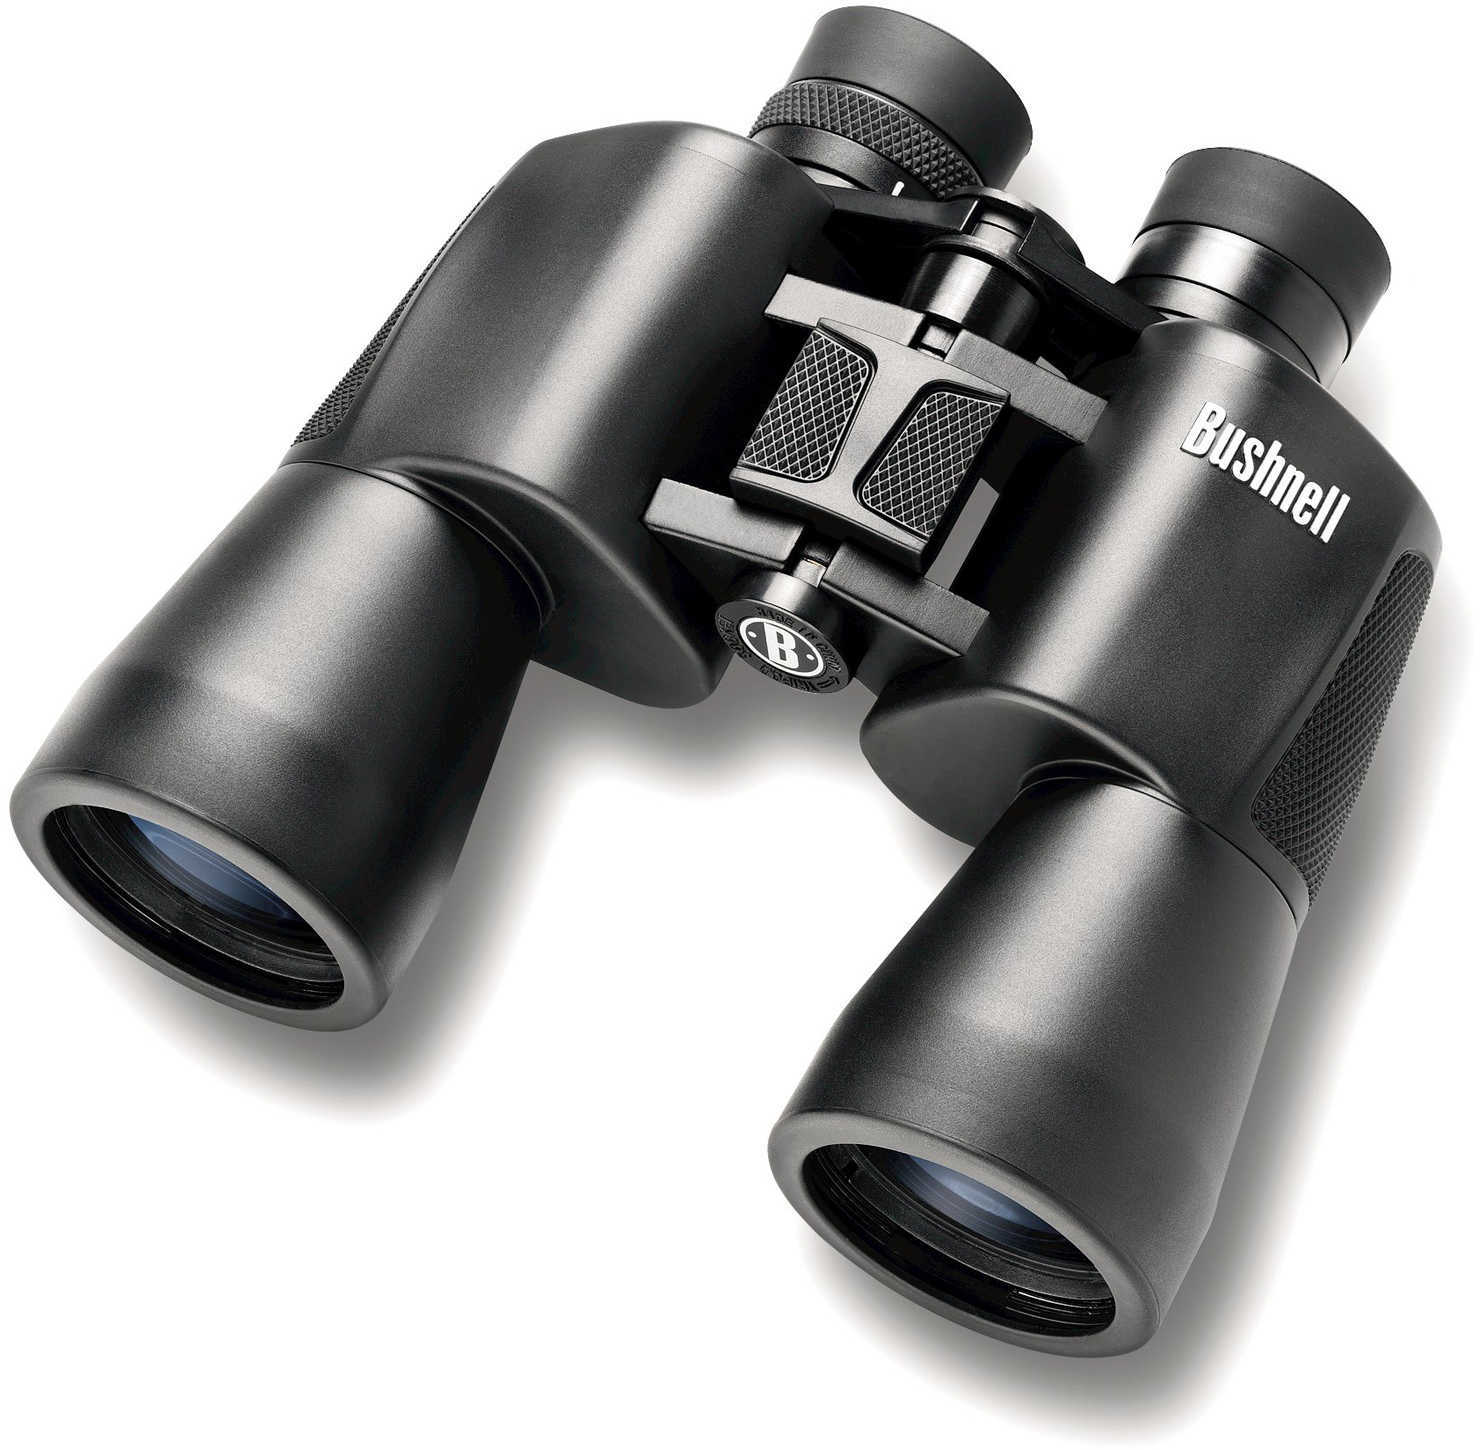 Bushnell 10x50 Powerview Binoculars with Black Body Md: 131056